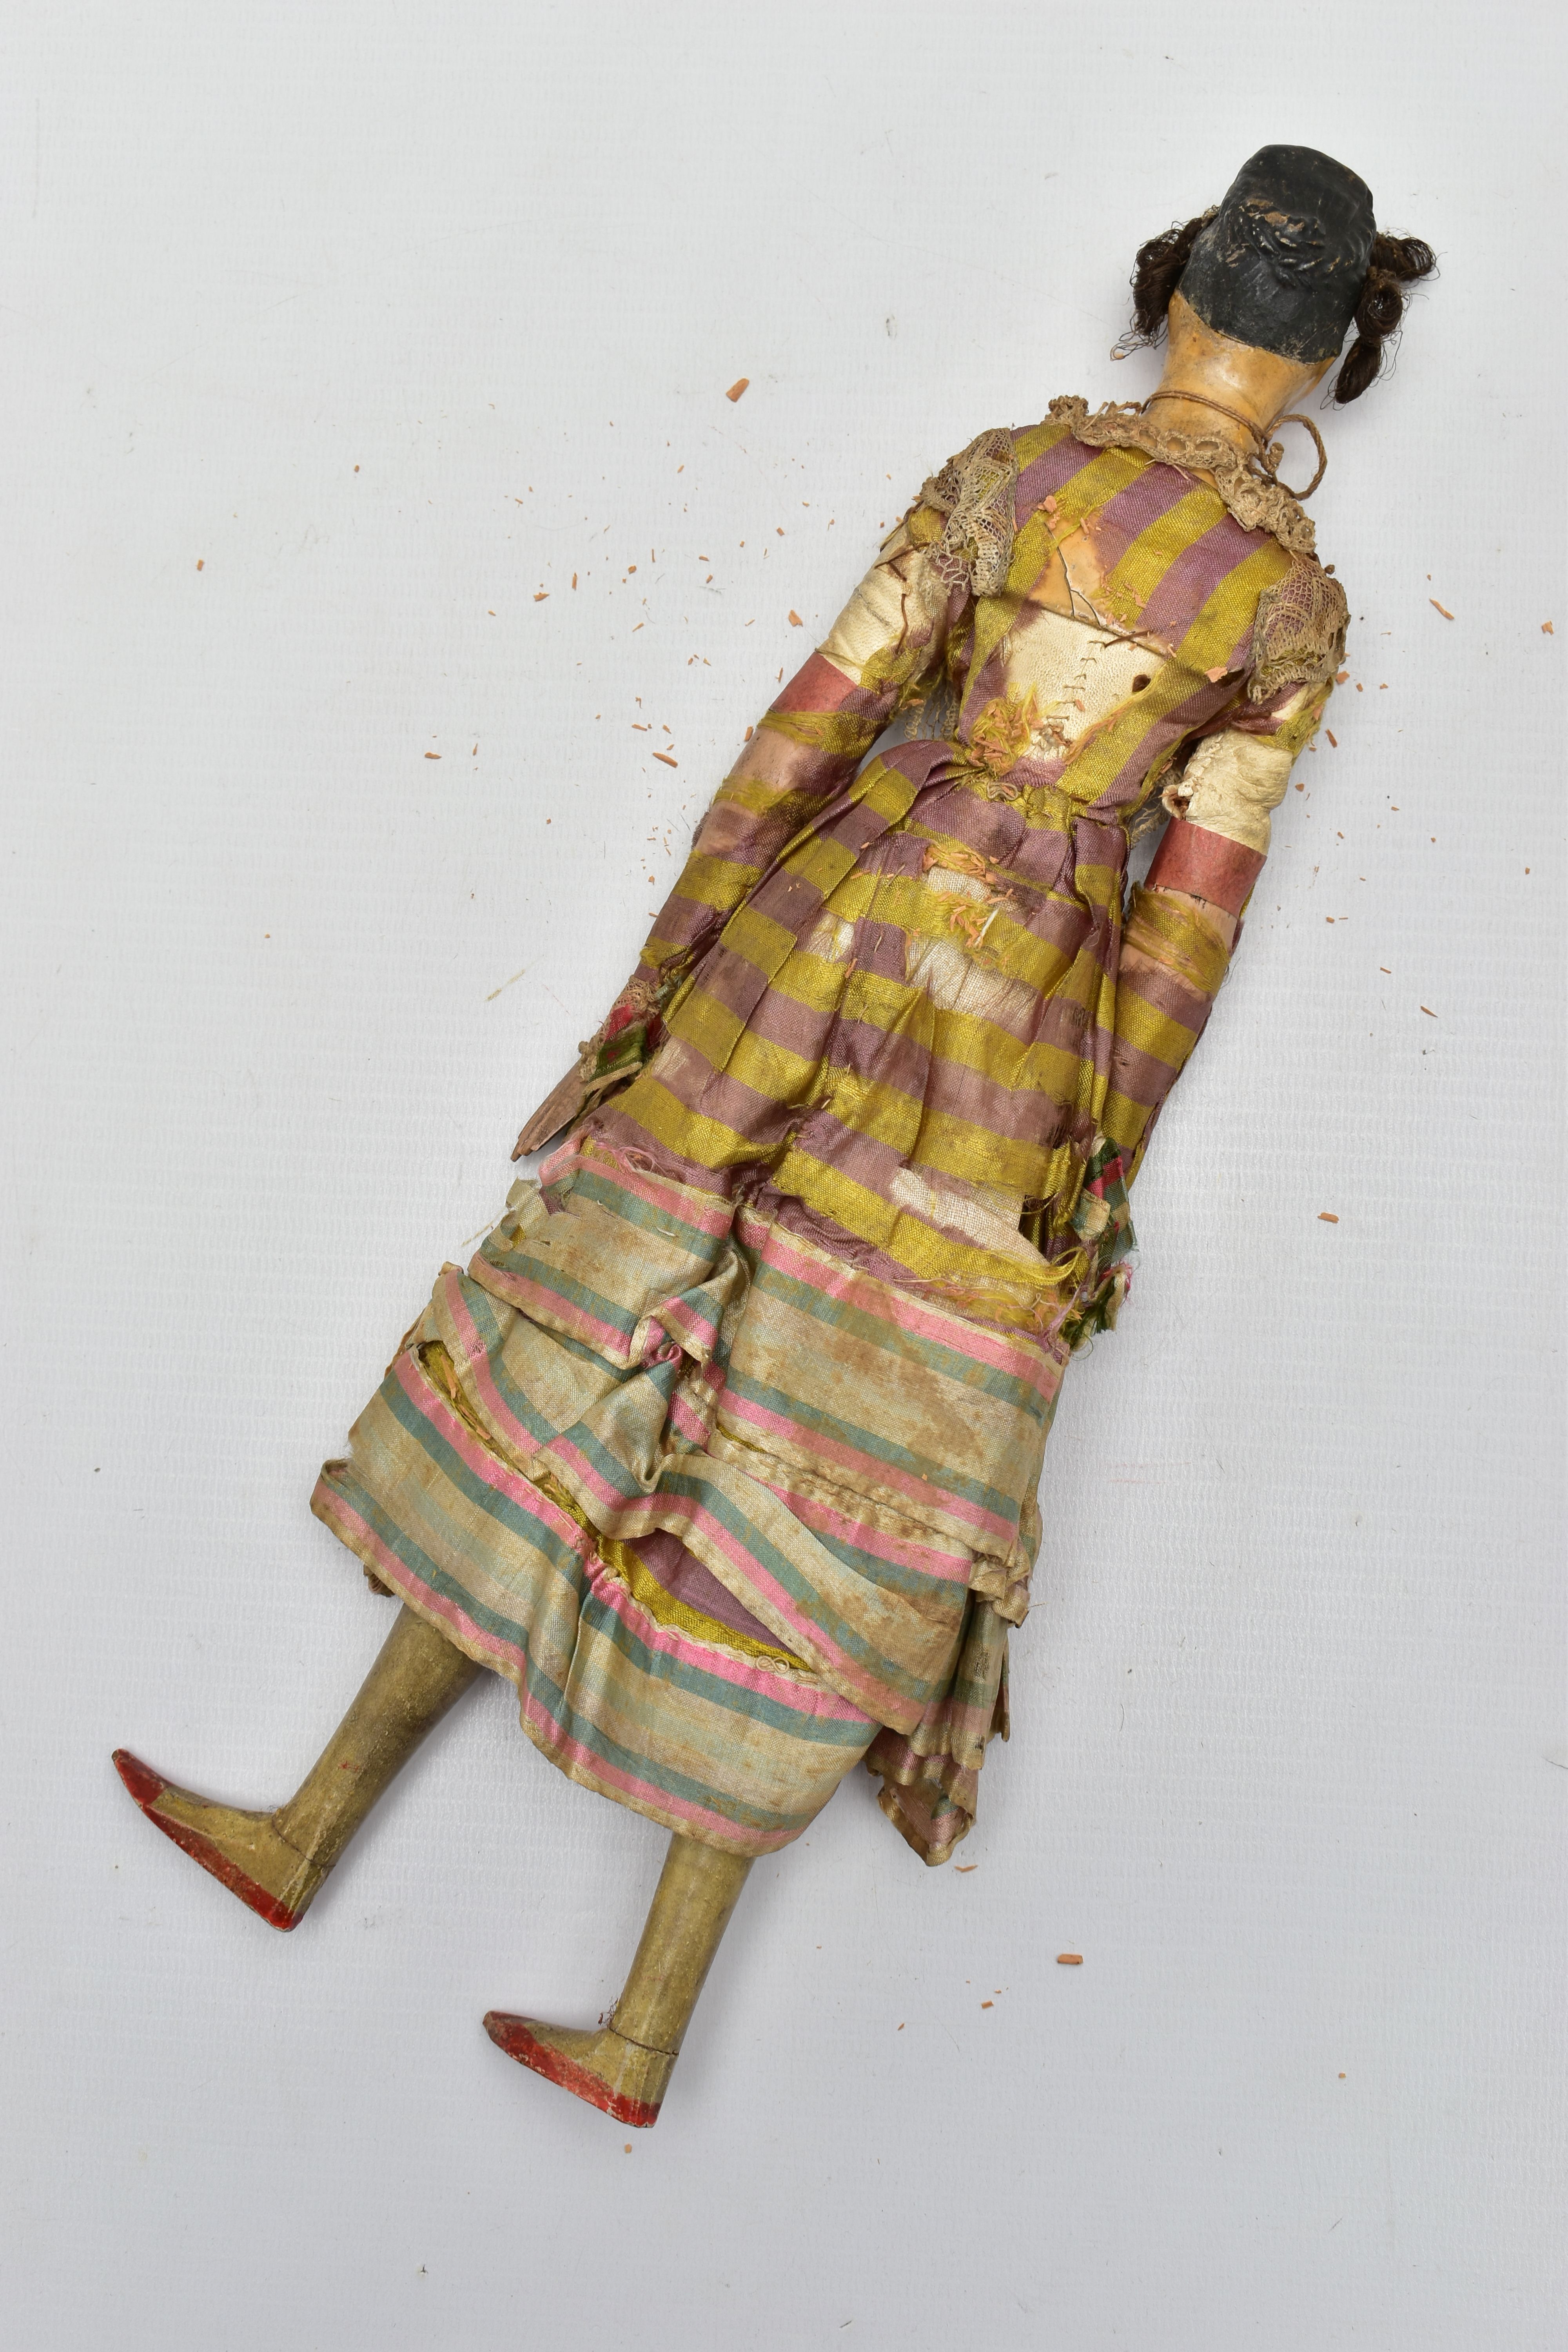 AN EARLY 19TH CENTURY PAPIER MACHE, LEATHER AND WOODEN DOLL, black painted high bun with inserted - Image 7 of 9